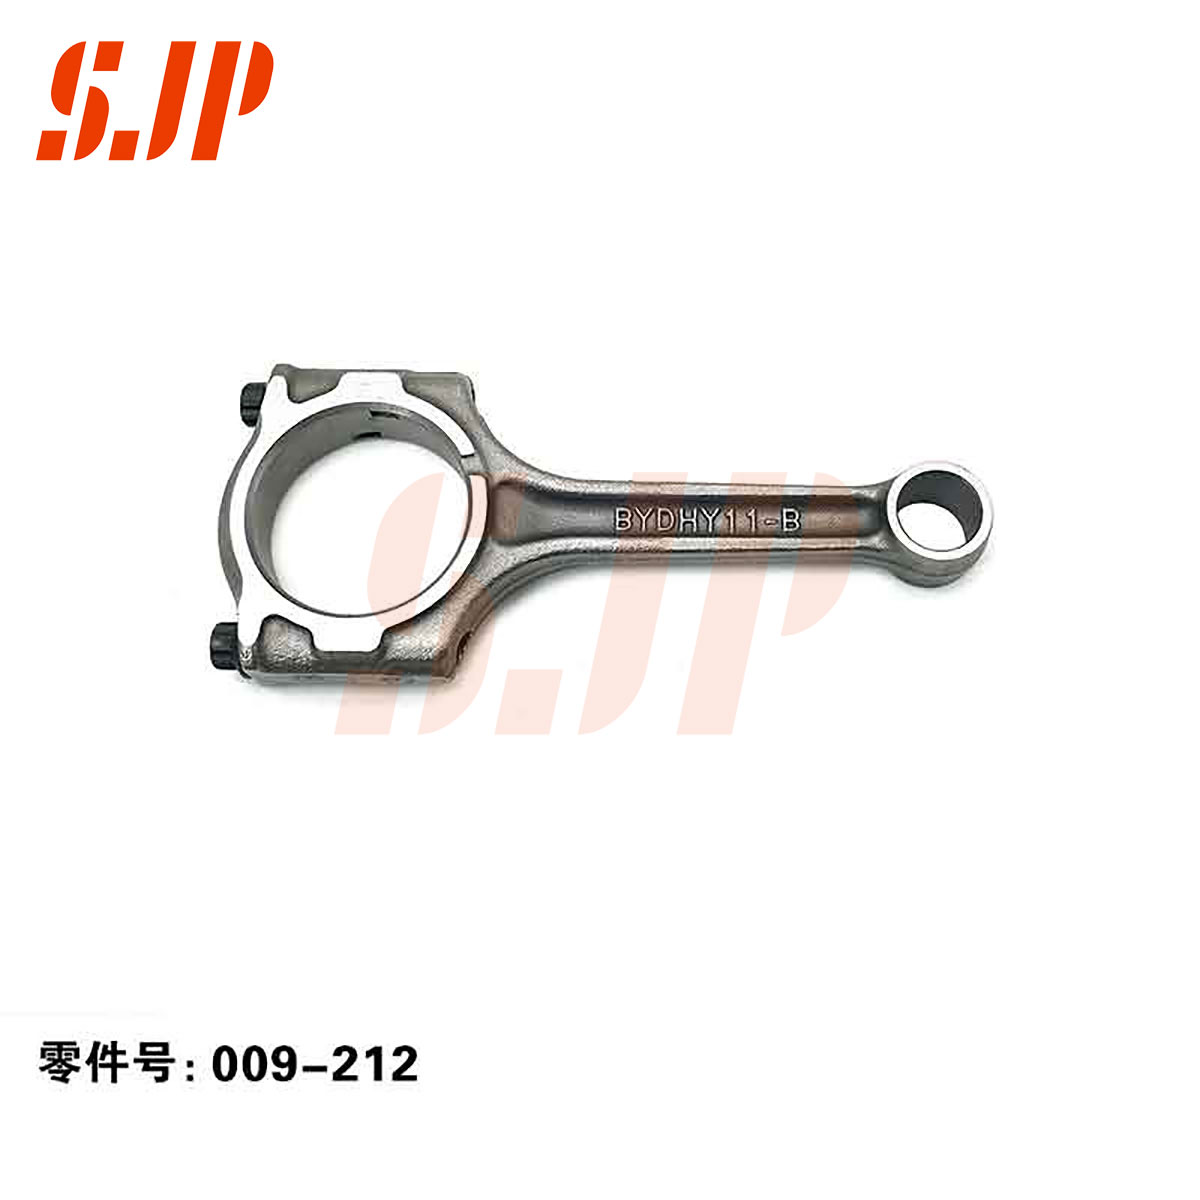 SJ-009-212 Connecting Rod For BYD 483QB